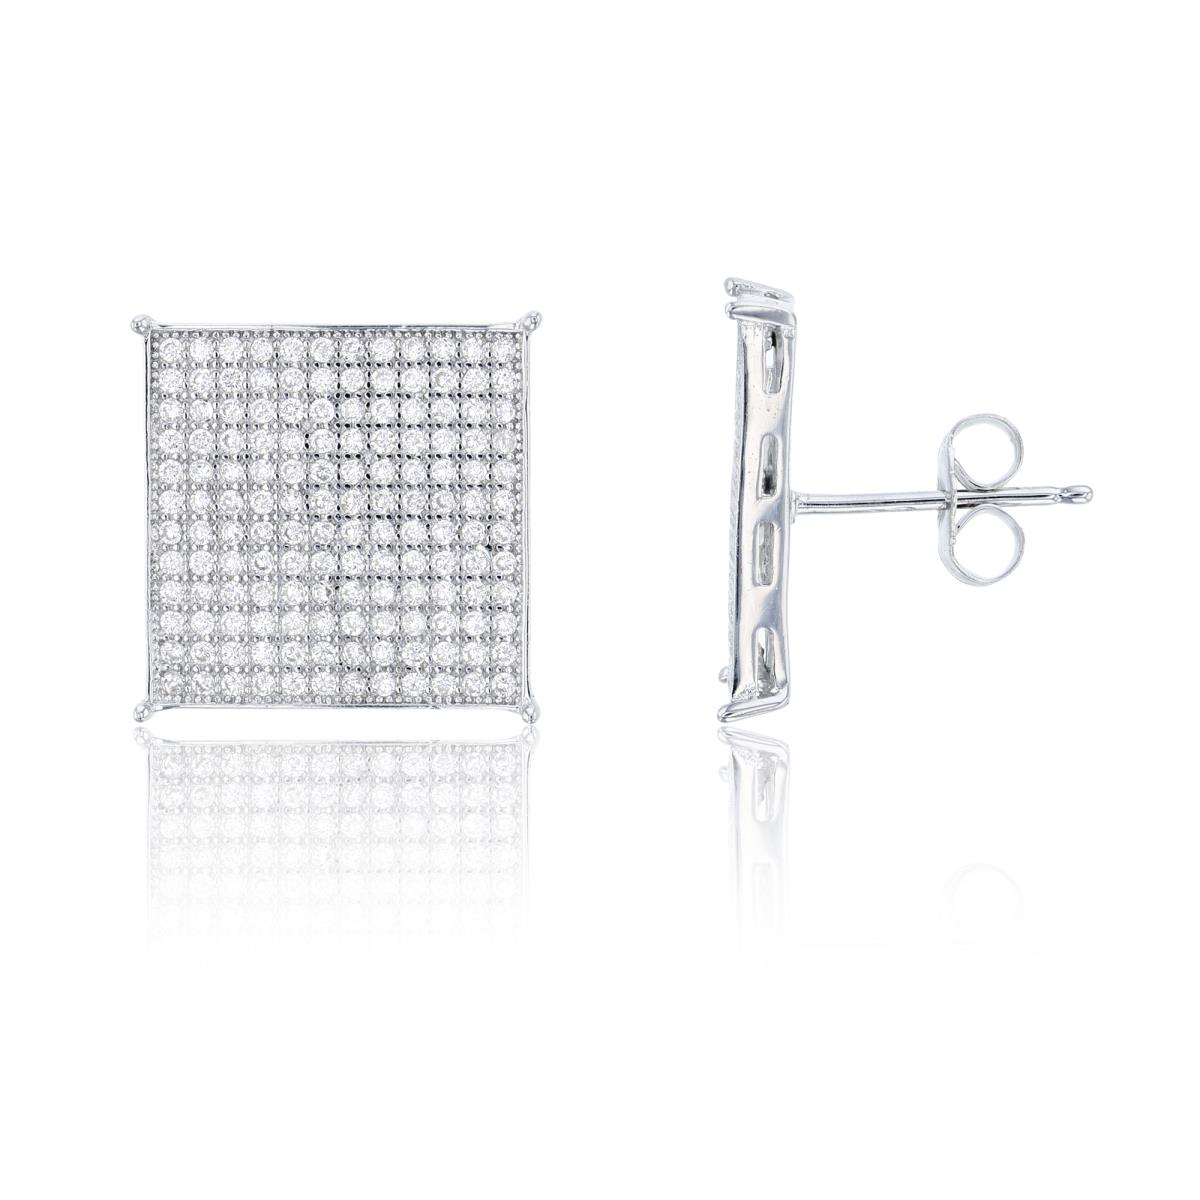 Sterling Silver 16.2x16.2mm Square Micropave Stud Earring